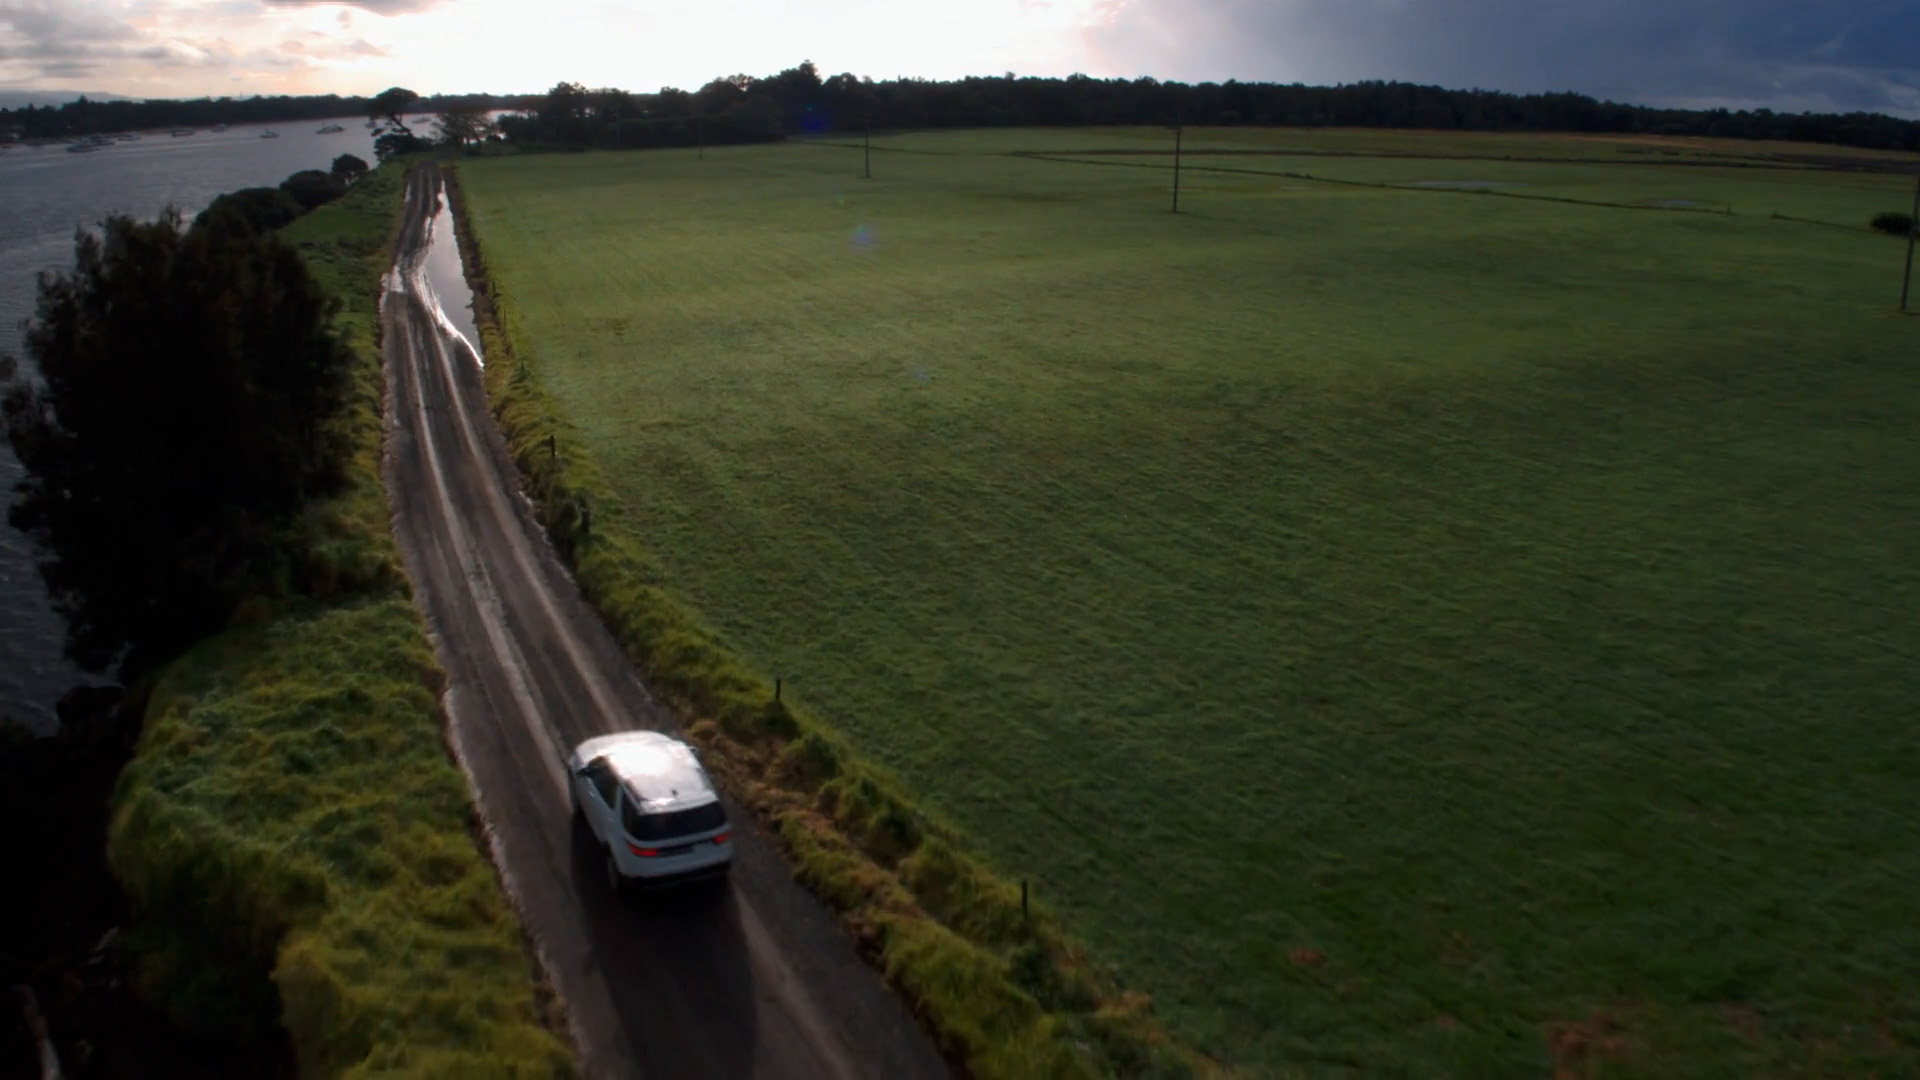 Land-Rover-Discovery-Campaign_DroneFX Ollie Davies Aerial-02.jpg